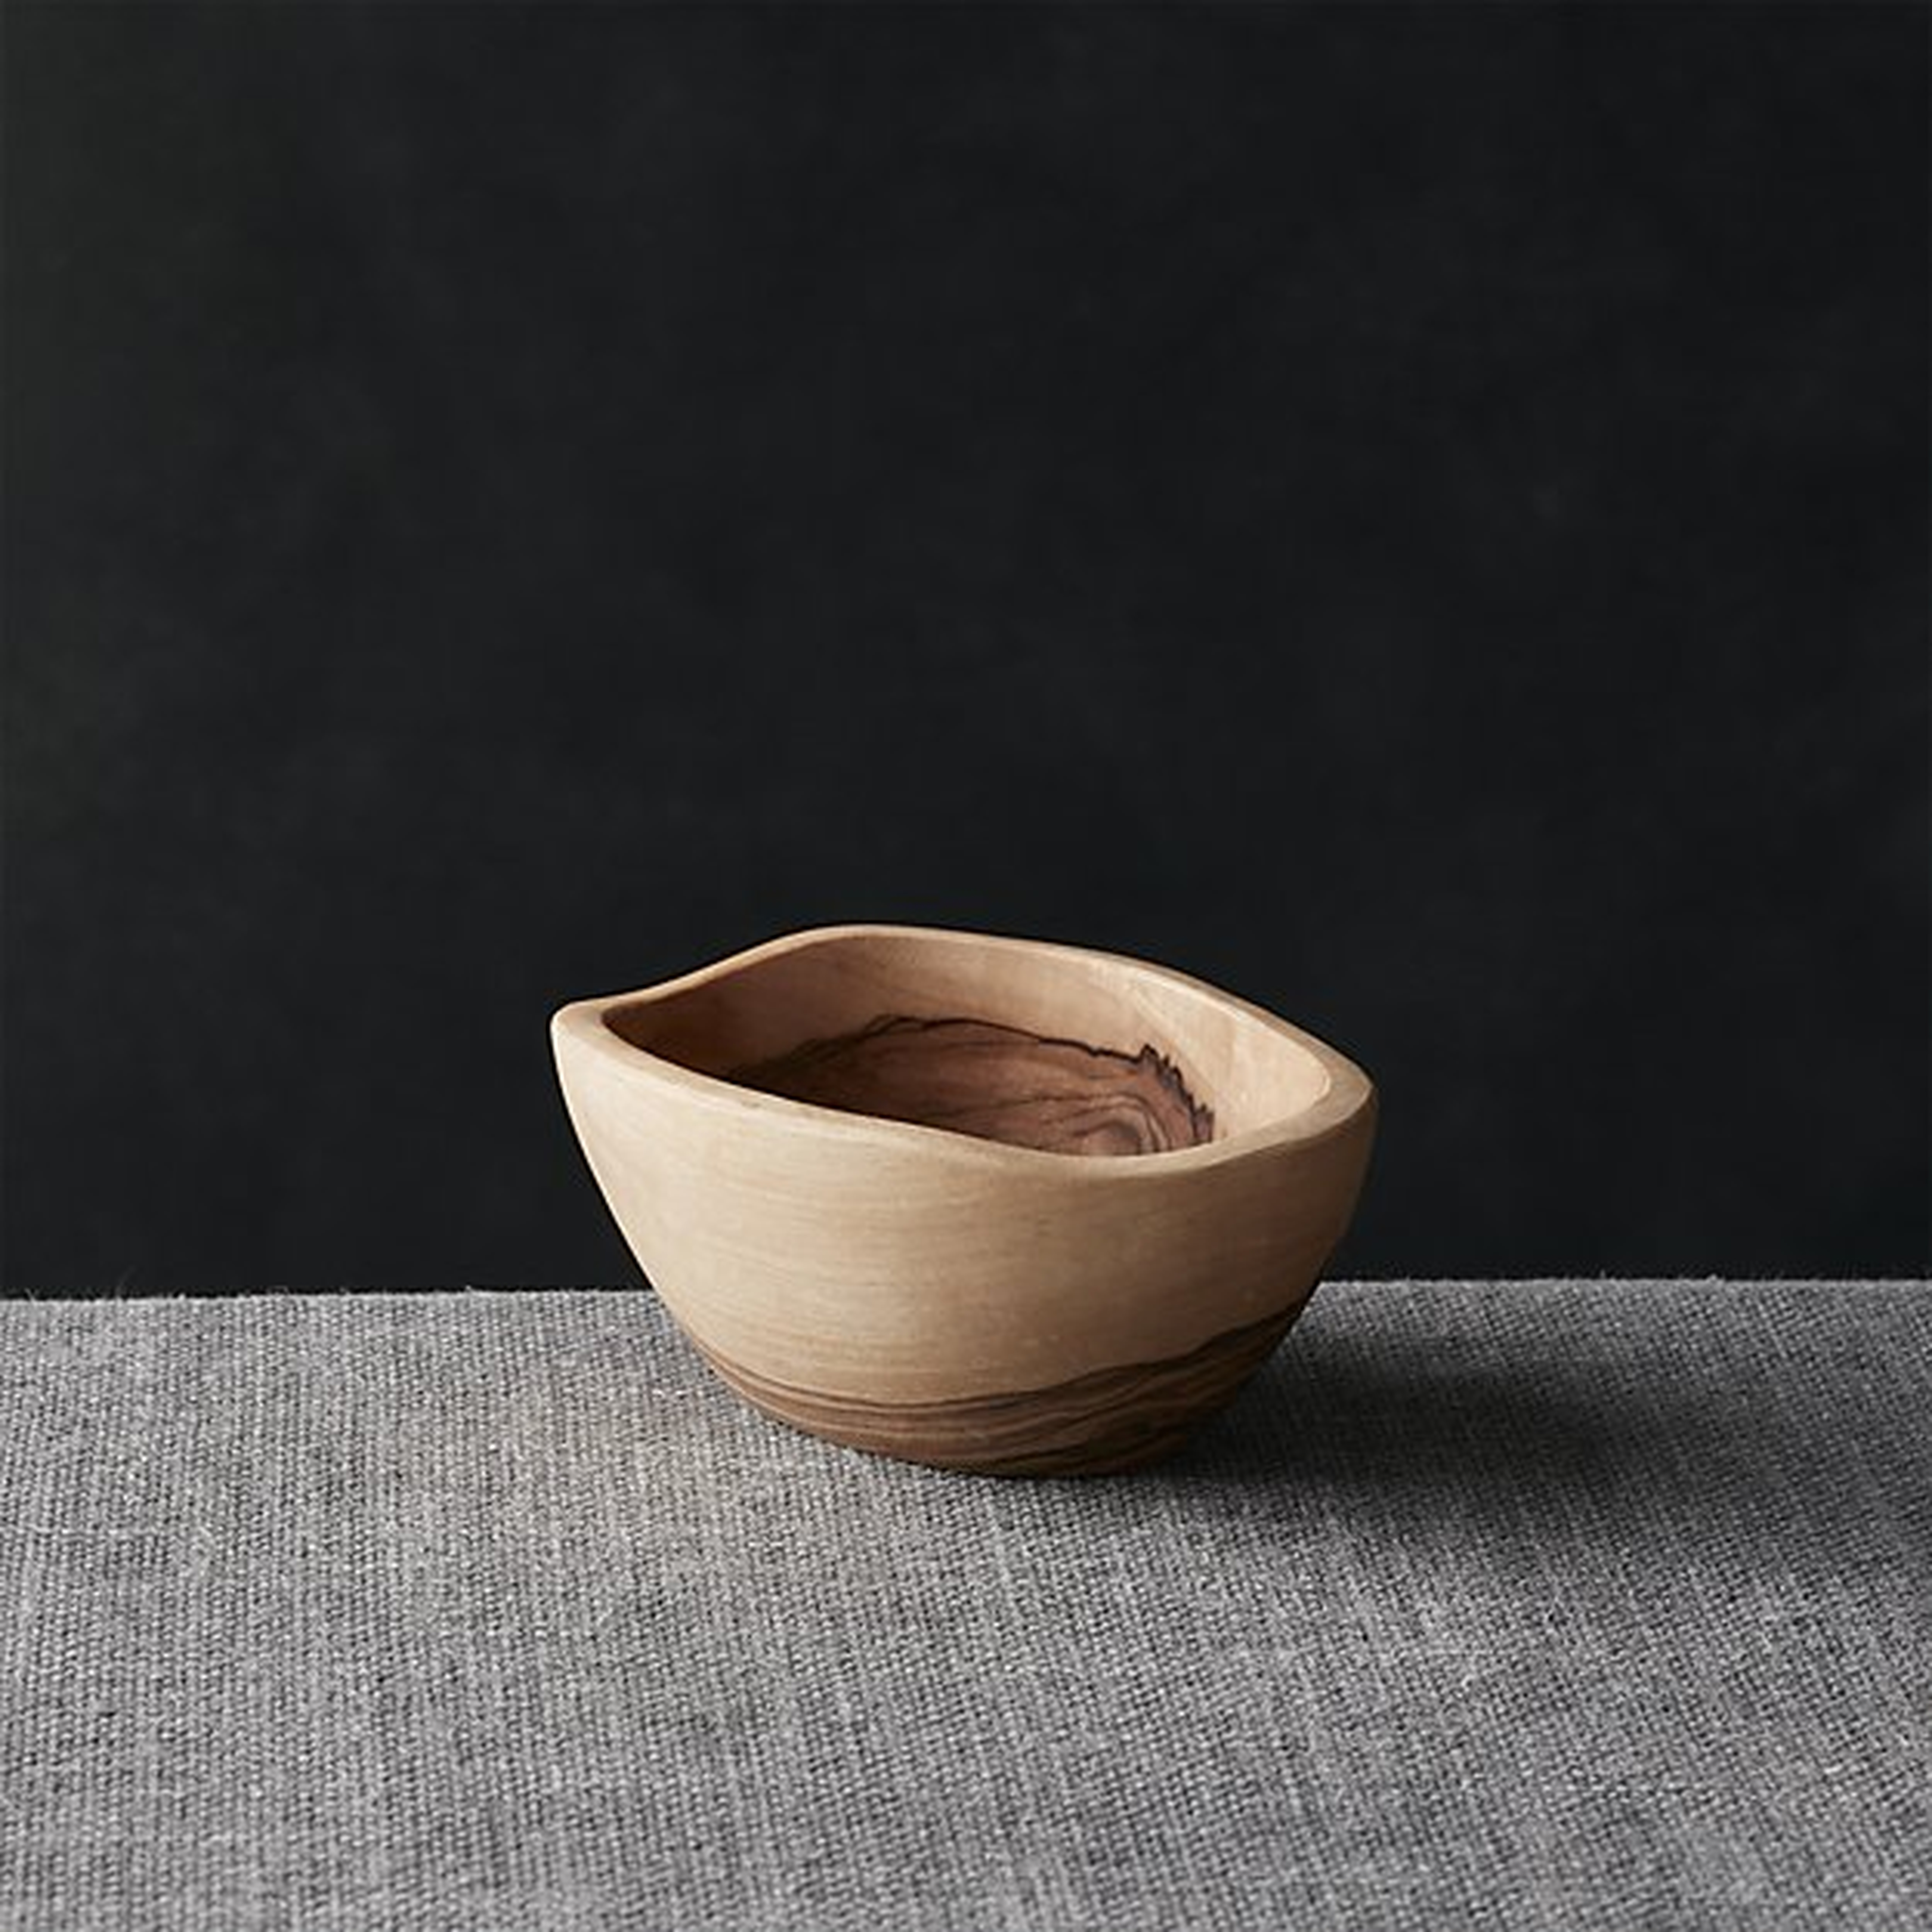 Olivewood 4.72"x3.5" Nibble Bowl - Crate and Barrel